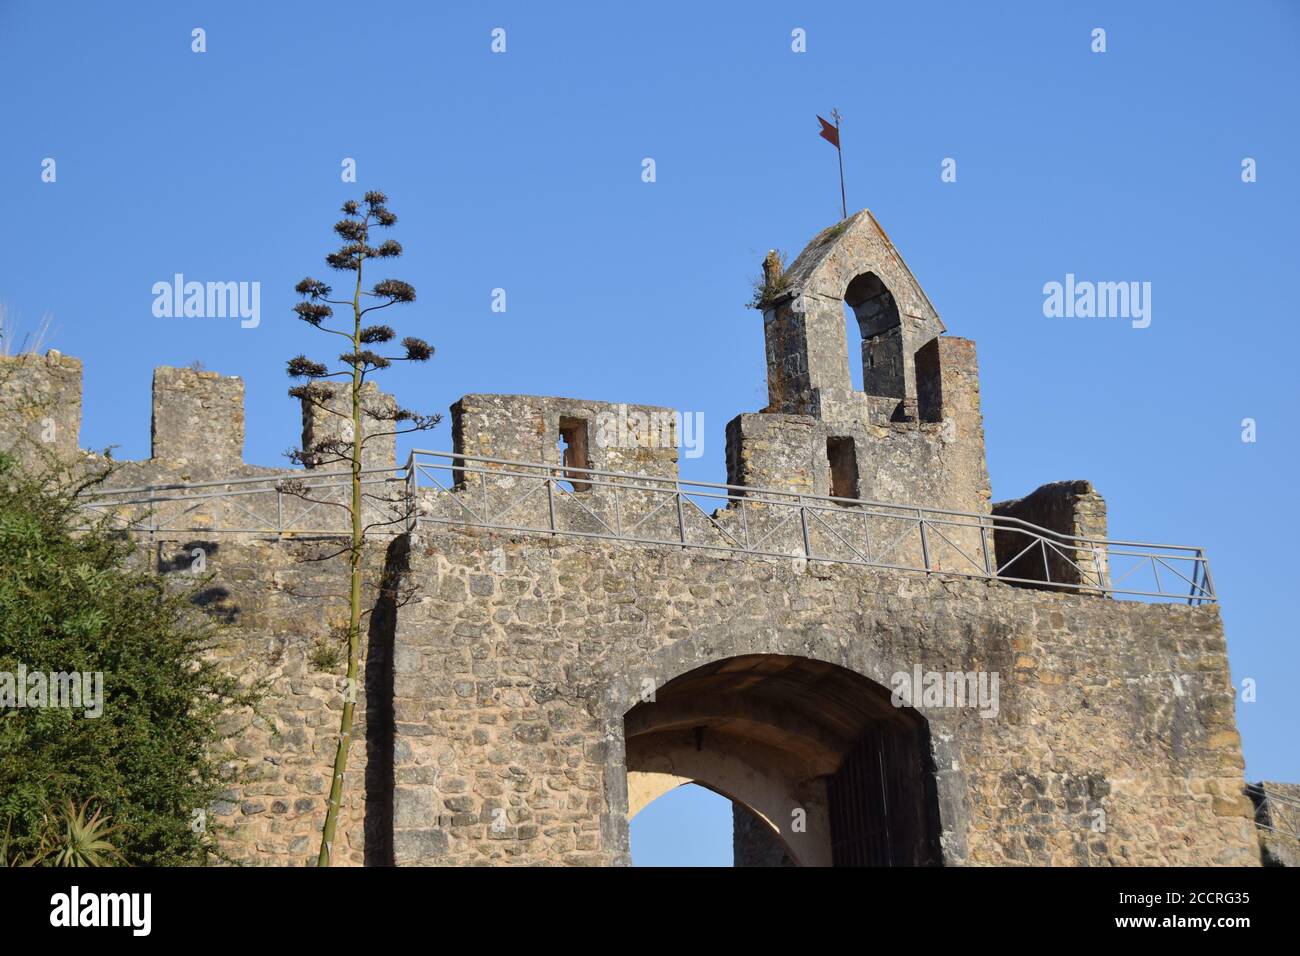 Convento de Cristo outside details of the Convent of Christ Tomar Portugal Stock Photo